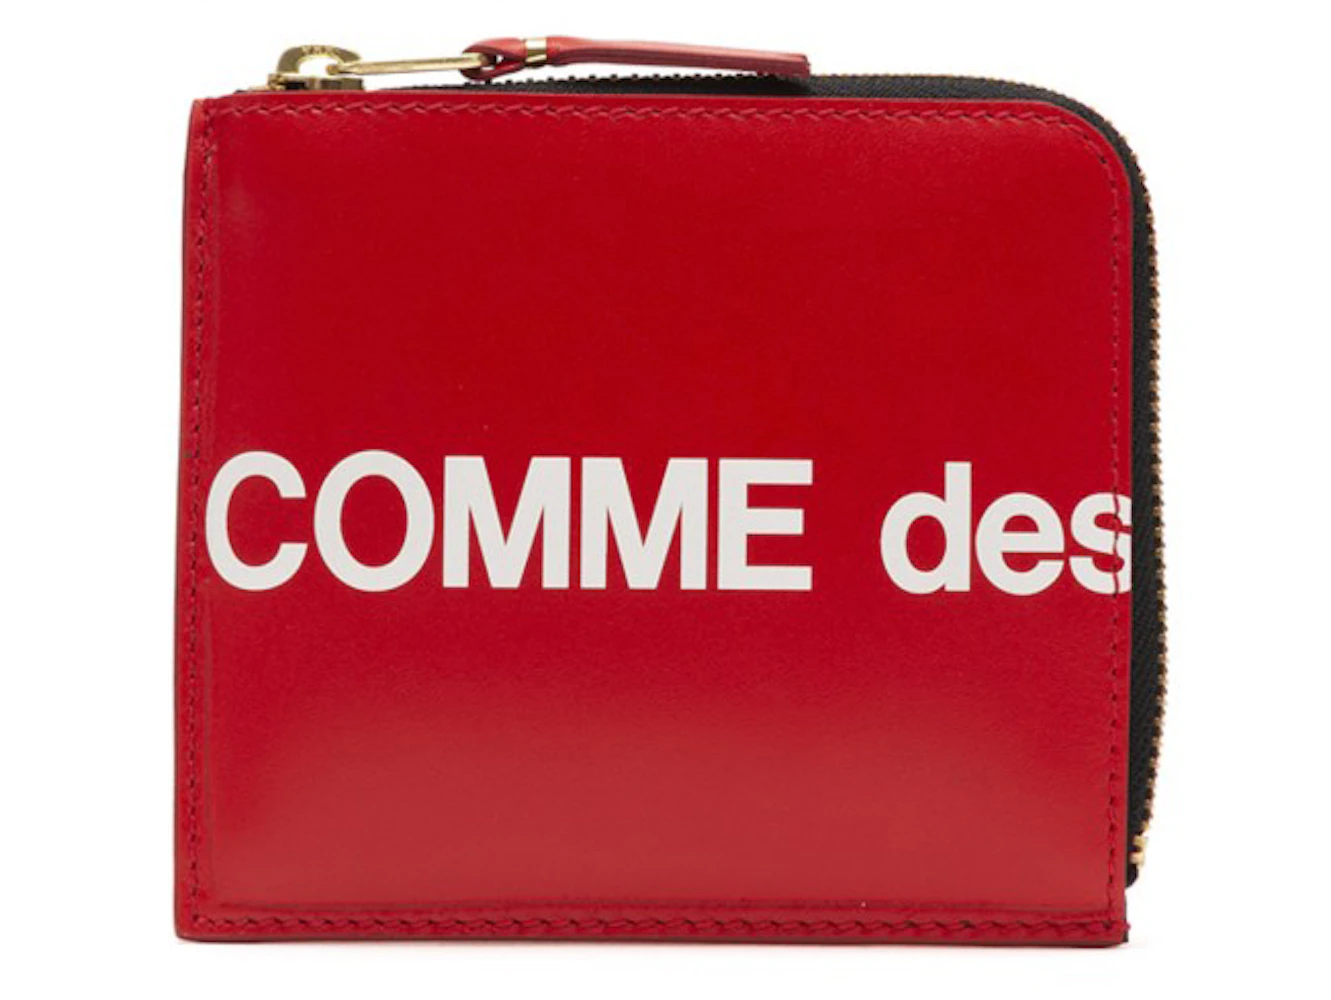 Comme des Garcons SA3100HL Huge Logo Wallet Red in Leather with Gold ...